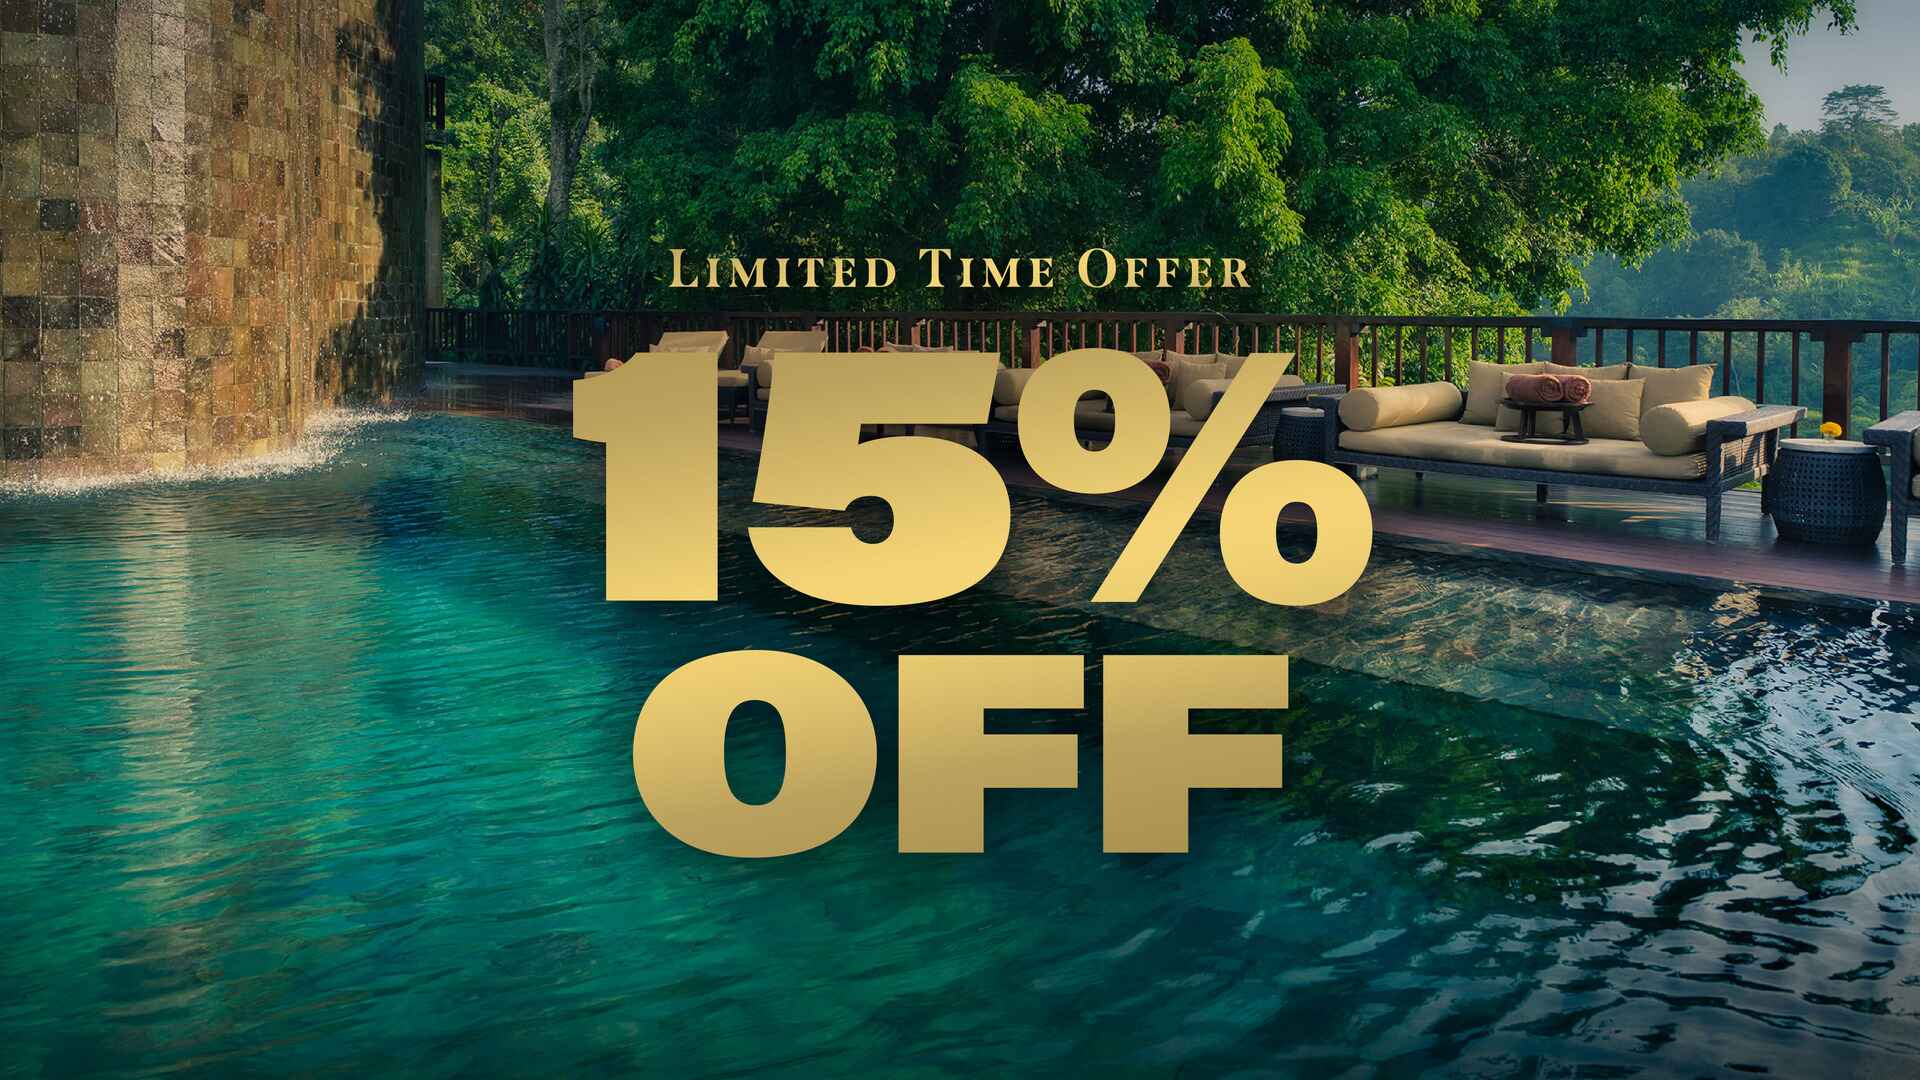 Bali All Inclusive Resort - Limited Time Offer